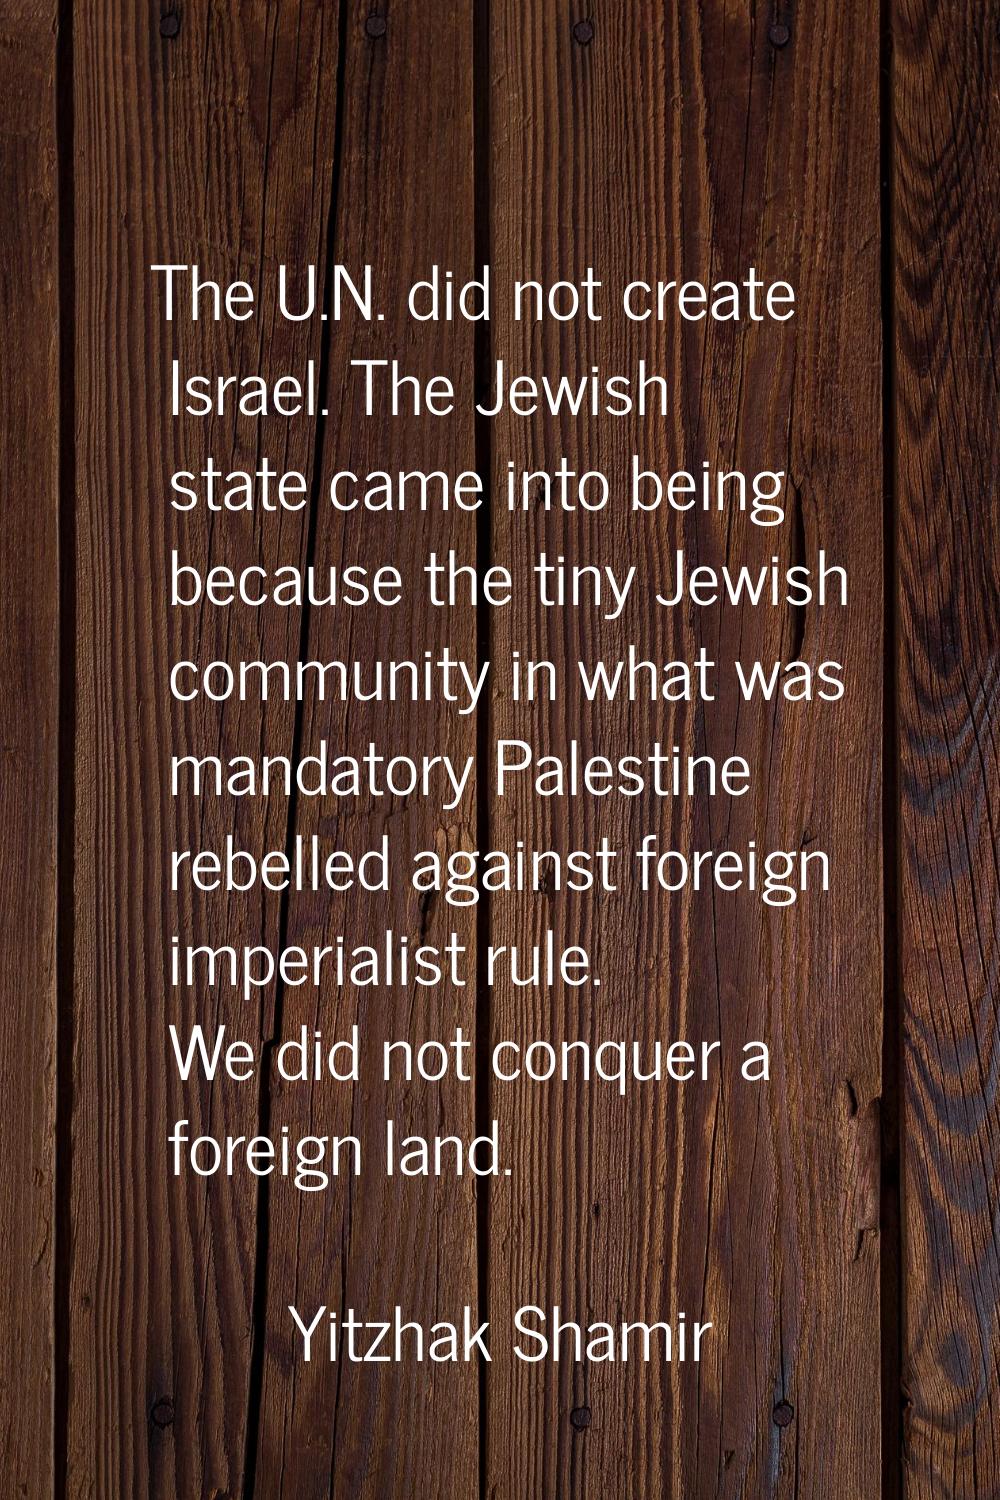 The U.N. did not create Israel. The Jewish state came into being because the tiny Jewish community 